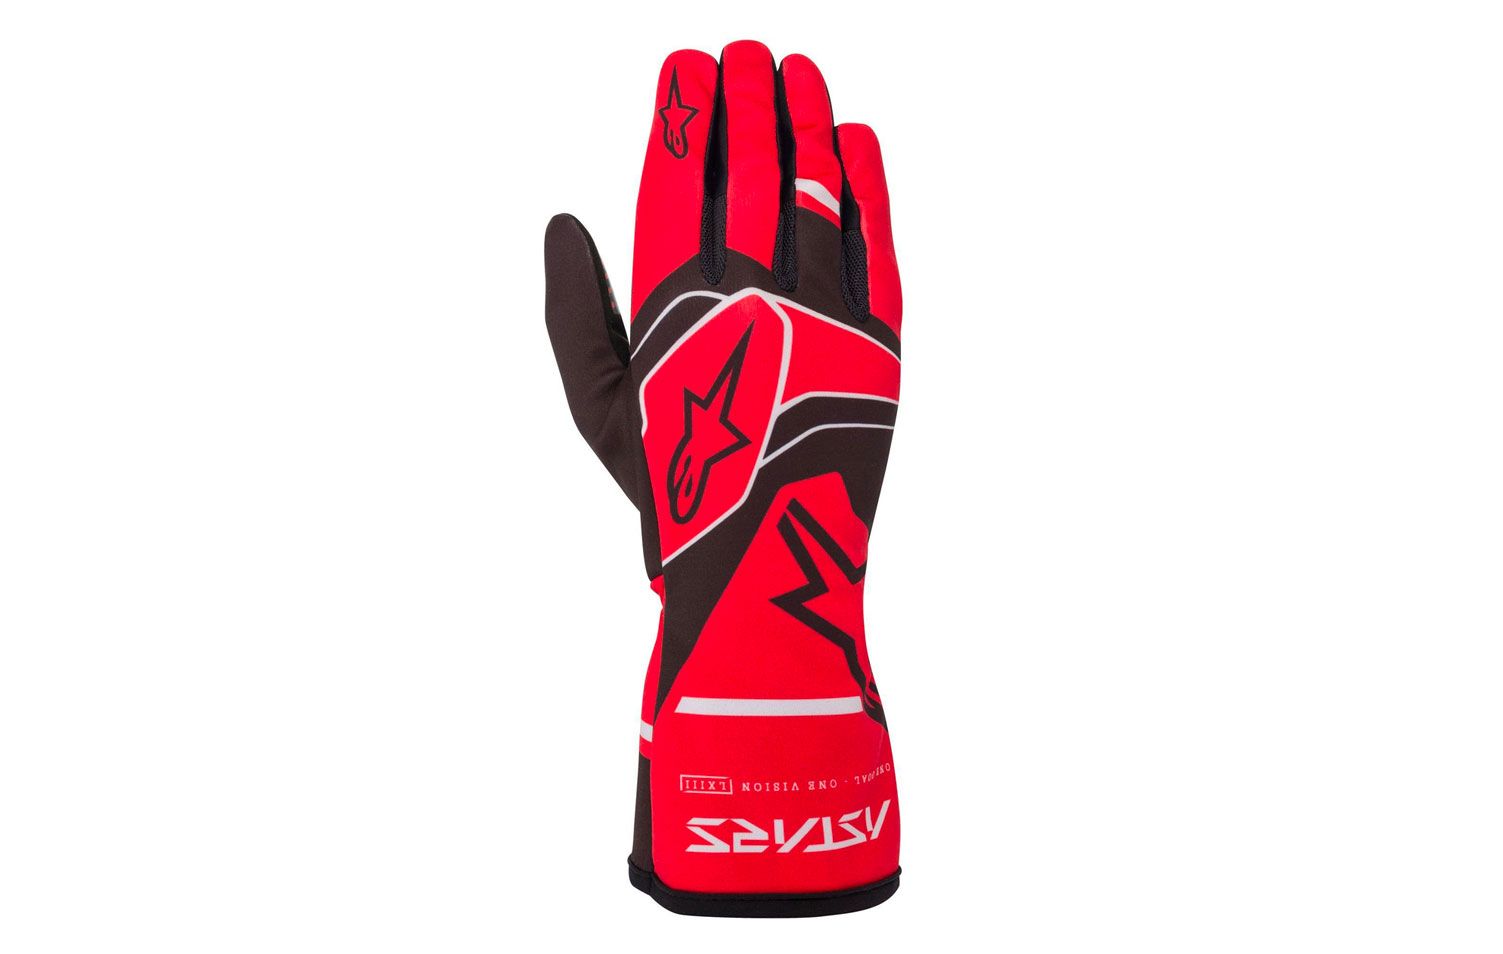 Alpinestars Tech 1-K Race V2 product image of a red and black glove featuring white details.